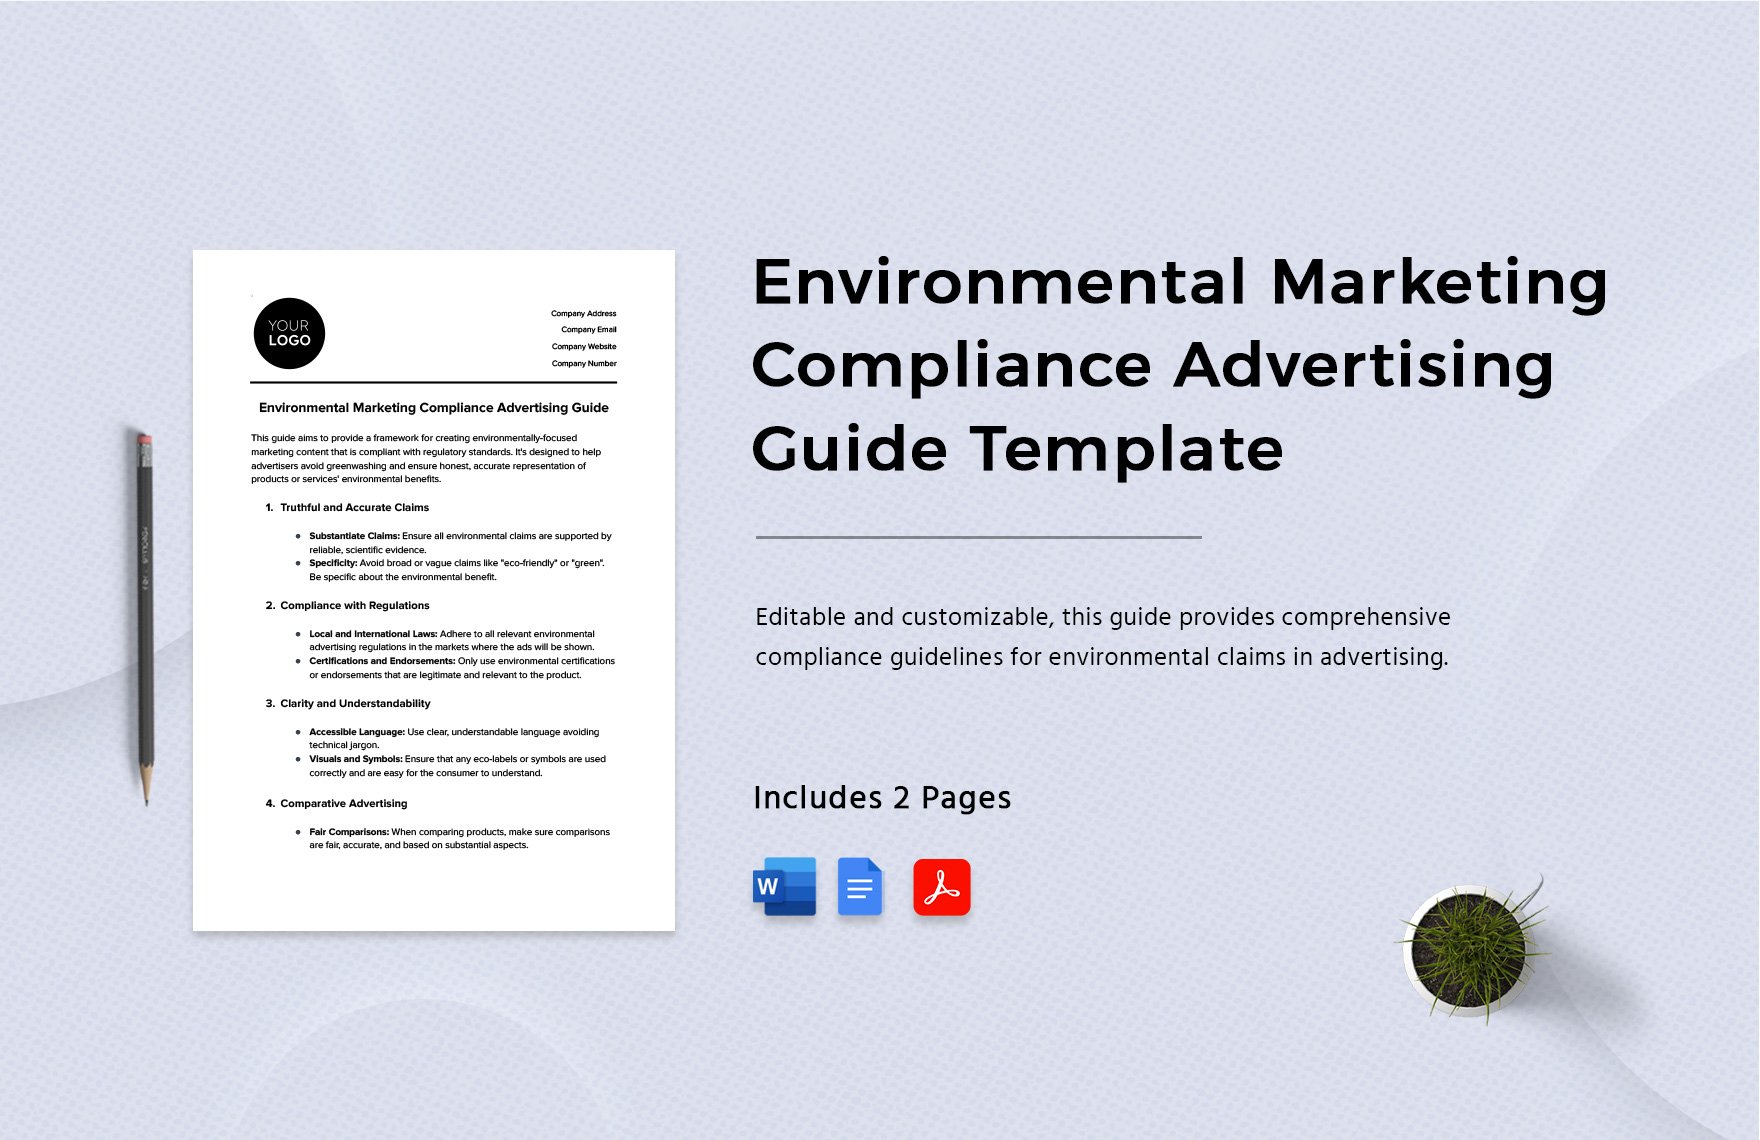 Environmental Marketing Compliance Advertising Guide Template in Word, Google Docs, PDF